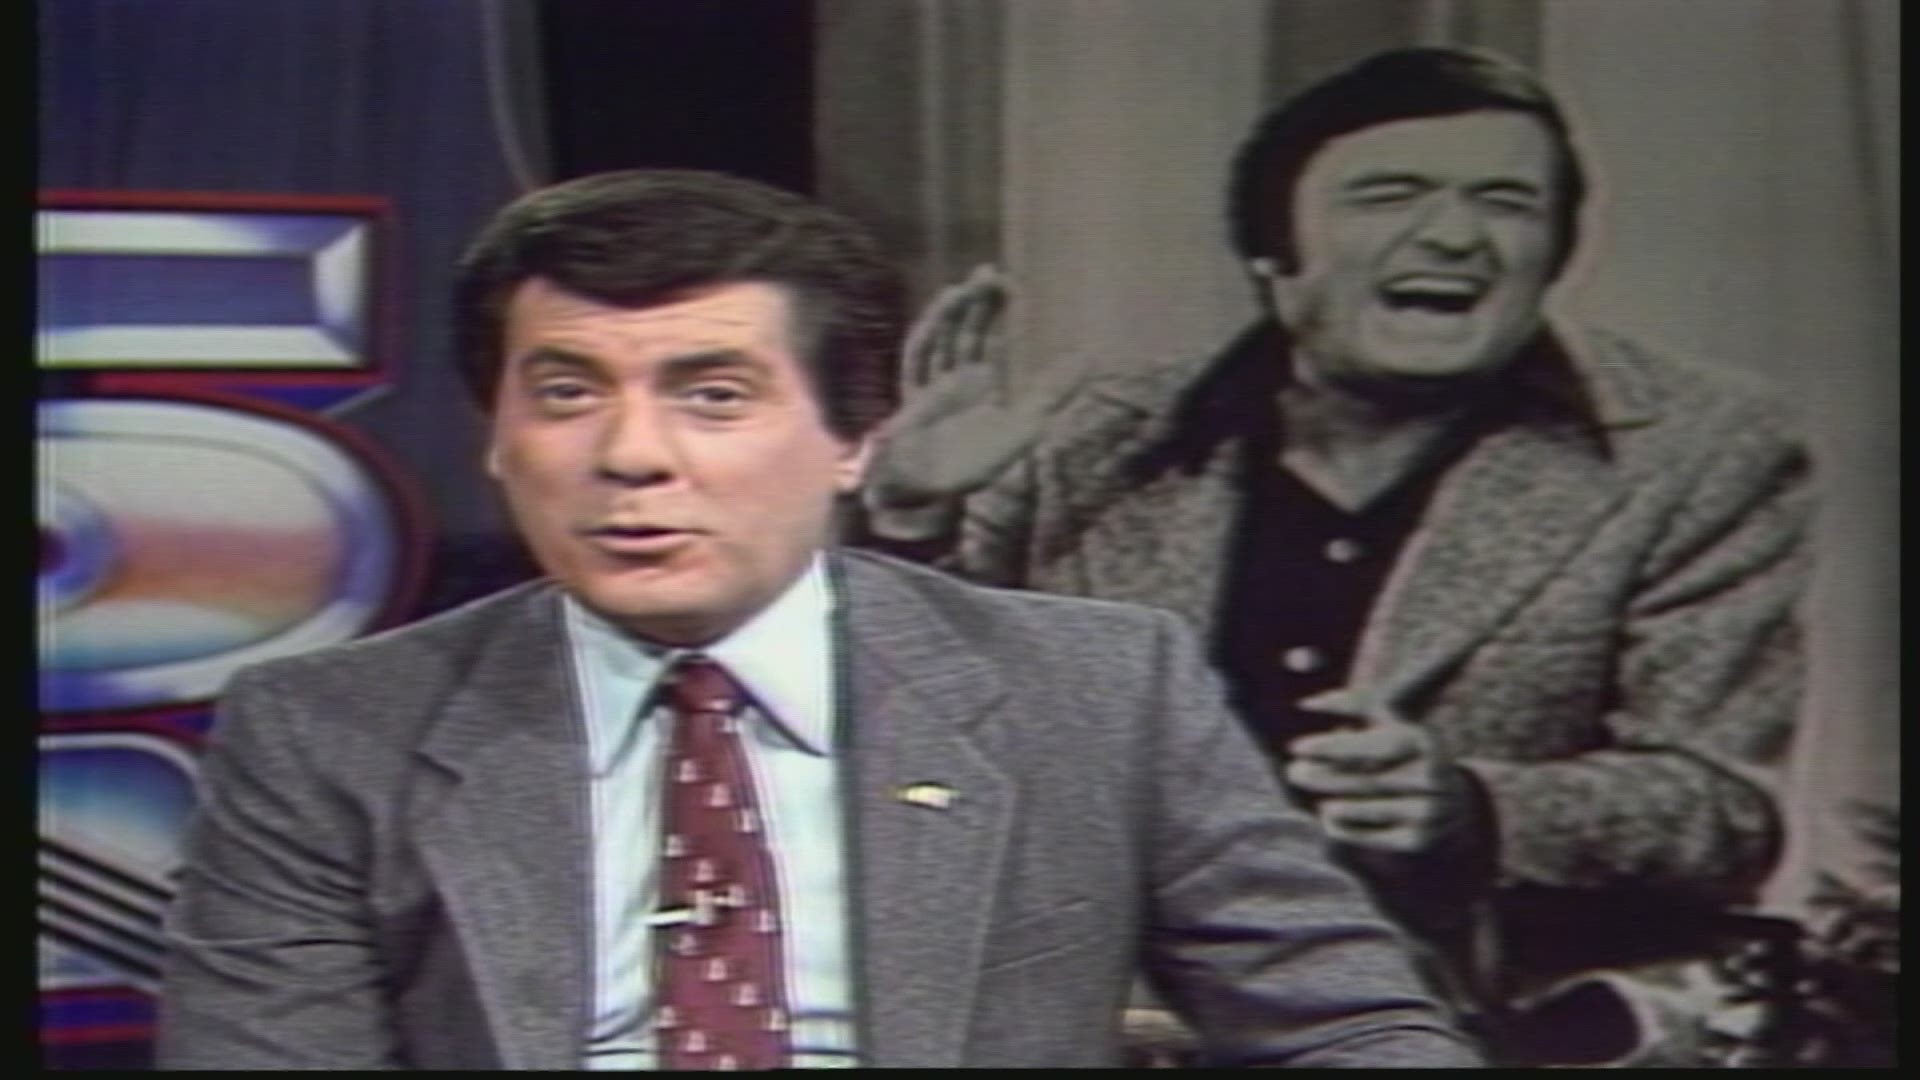 70 moments in WKYC history: The Mike Douglas Show begins in 1961